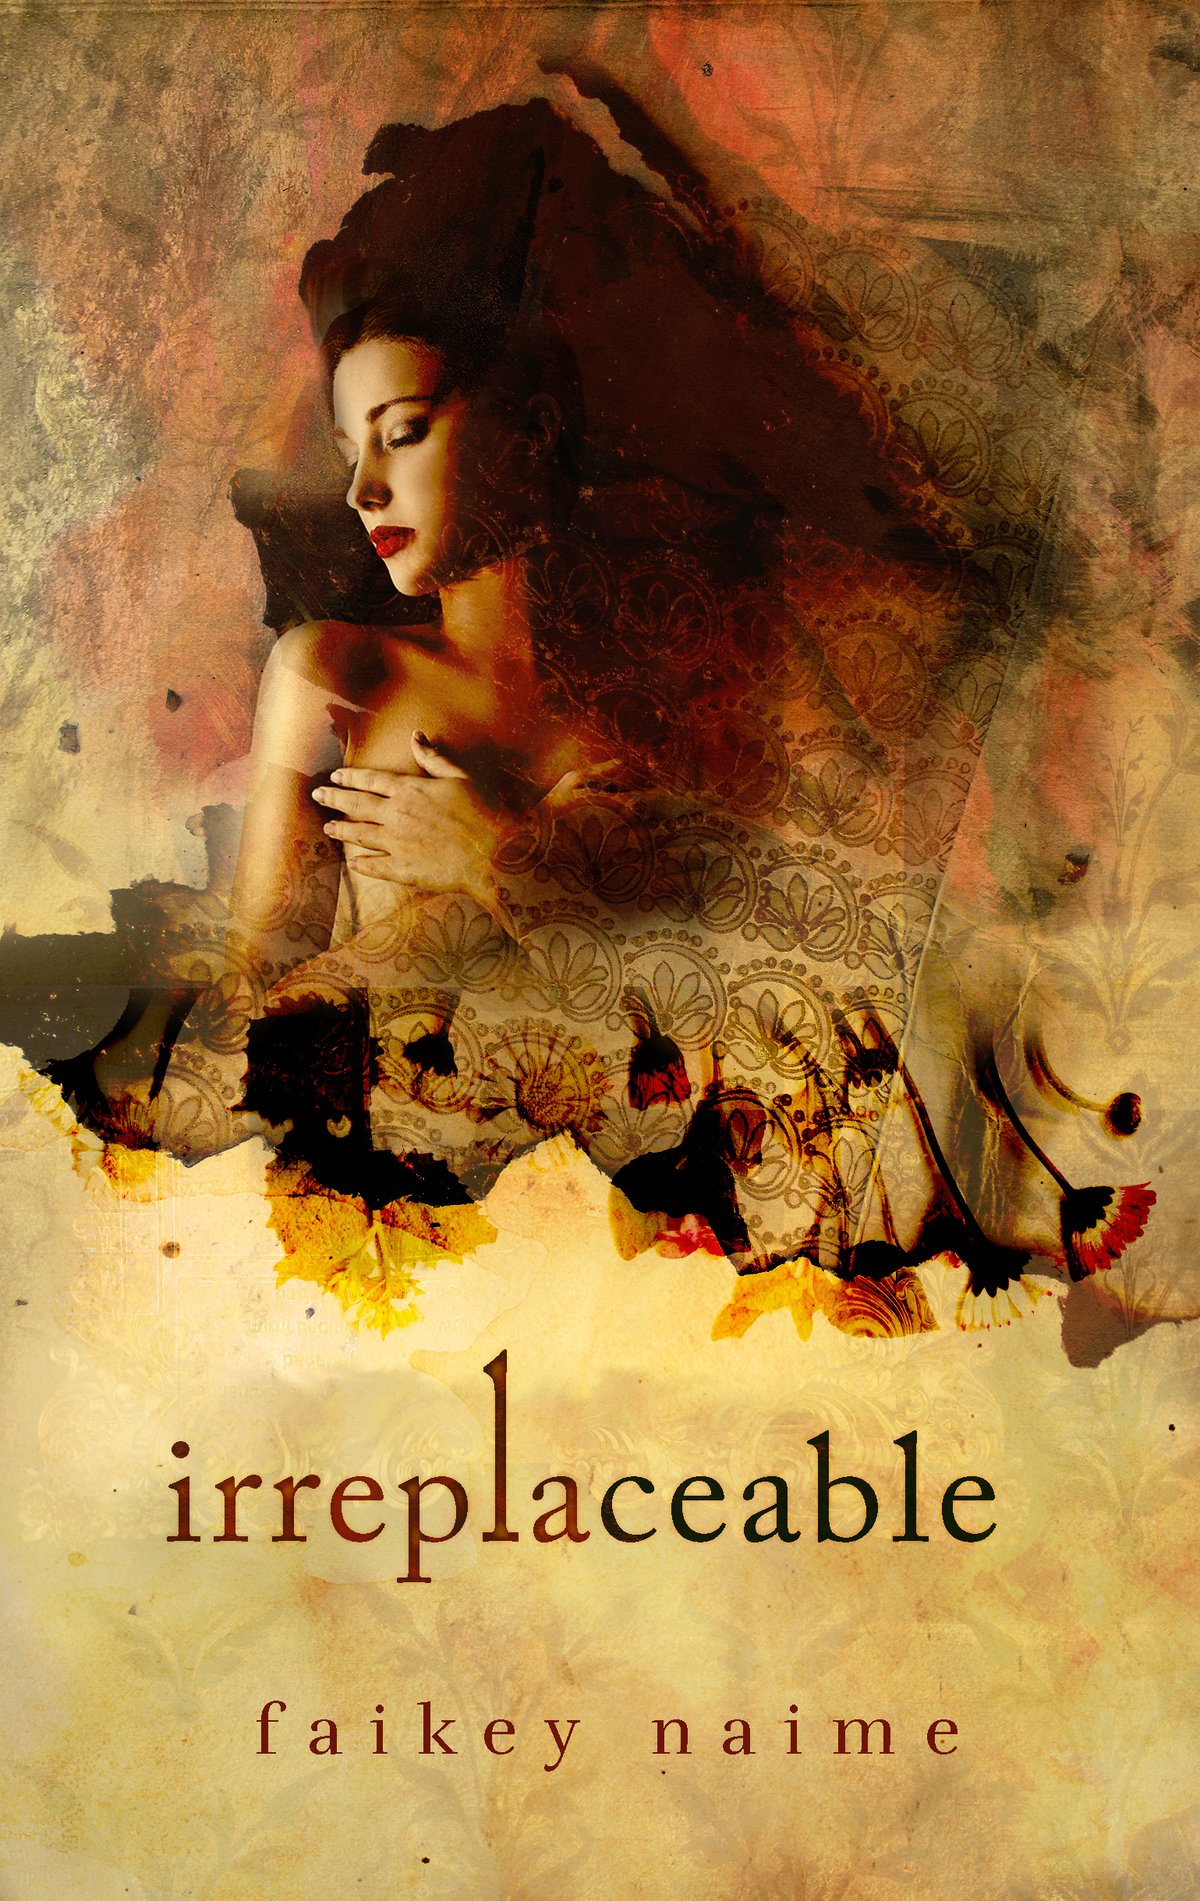 Image of "Irreplaceable"